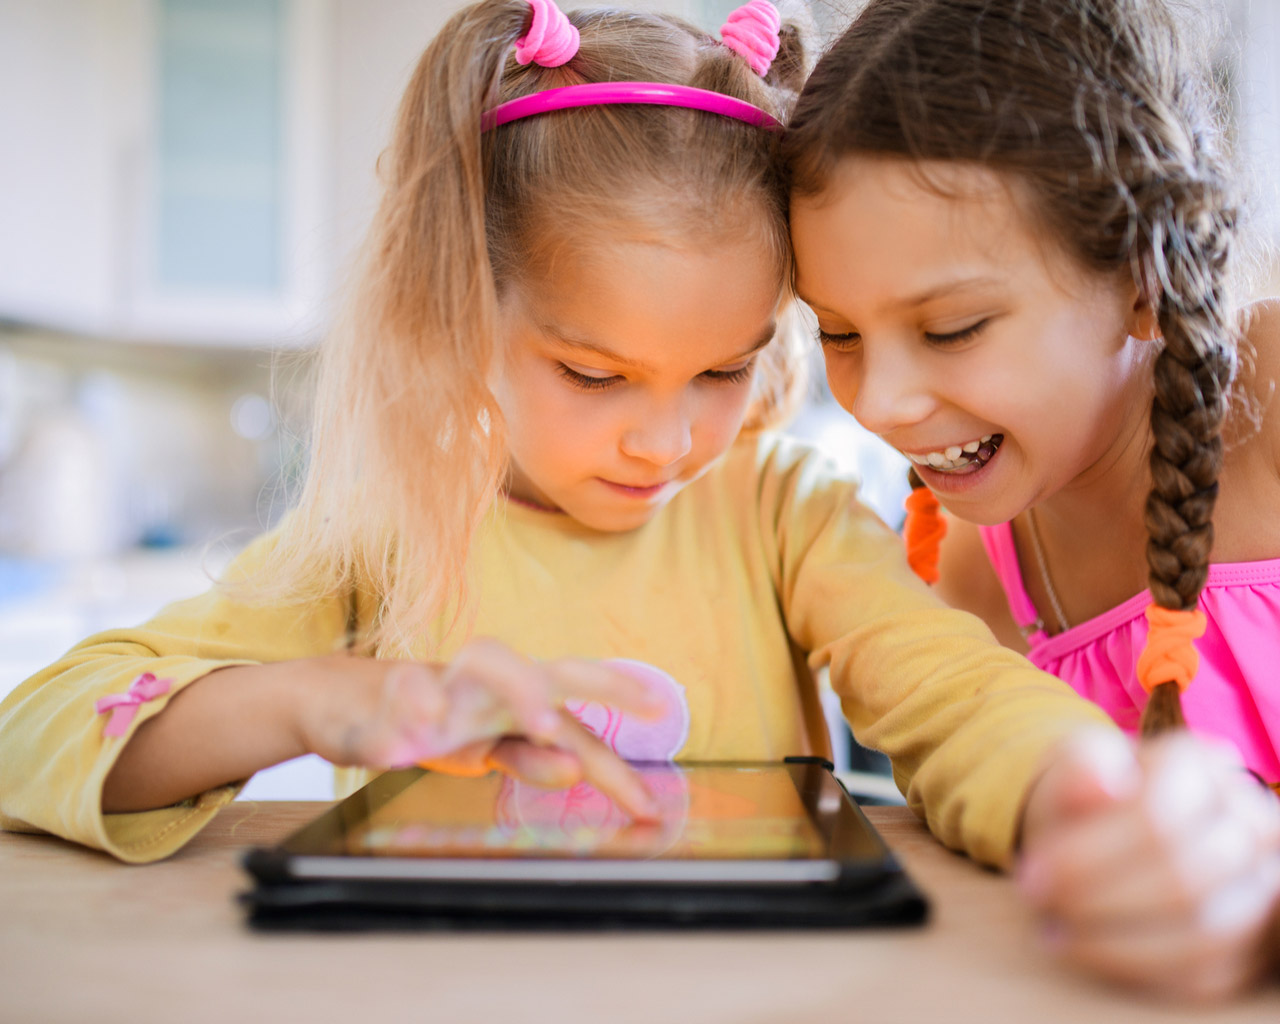 Two children play happily on a tablet